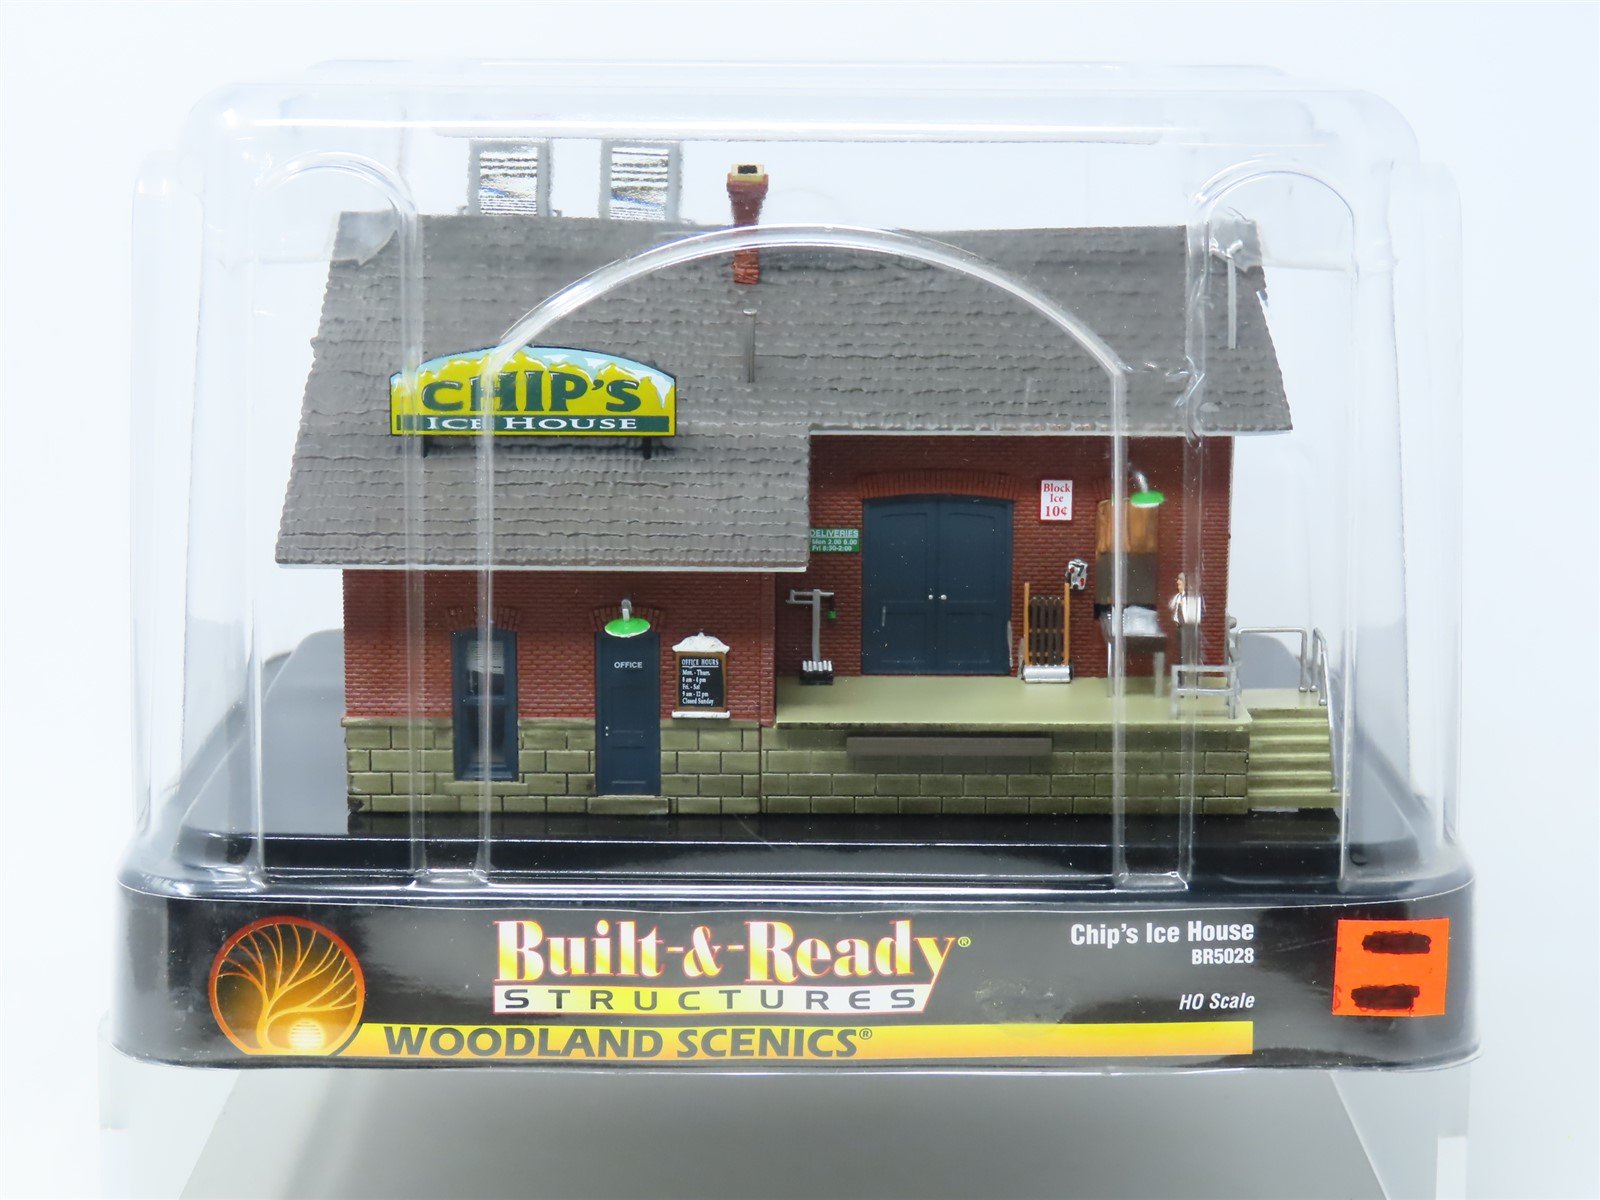 HO 1/87 Scale Woodland Scenics Built-&-Ready #BR5028 Chip's Ice House